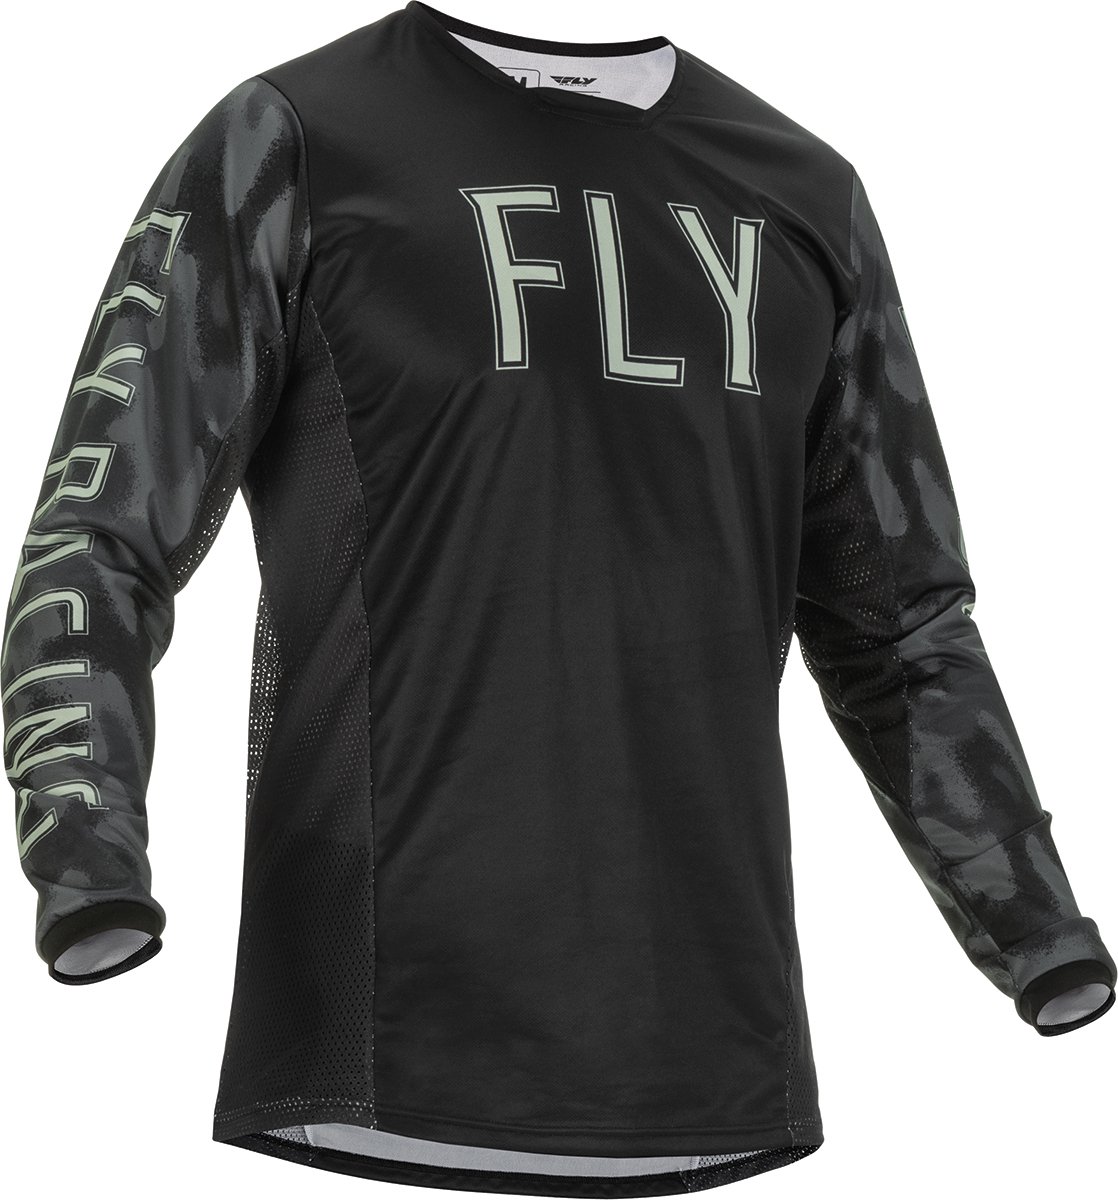 FLY Racing Kinetic S.E. Tactic Jersey Black Grey Camo L